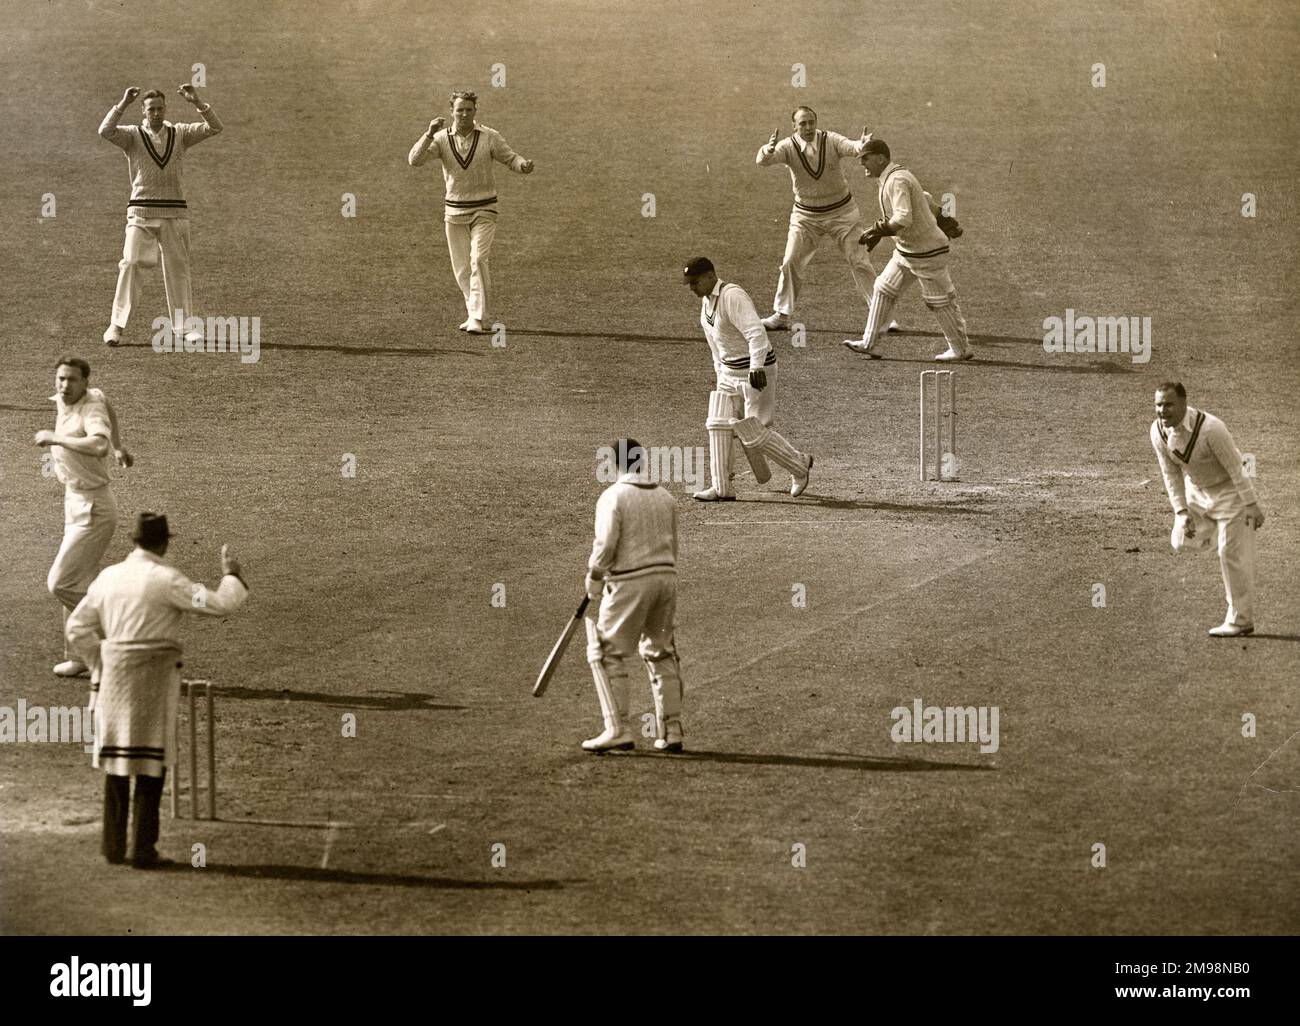 County Cricket Match at the Oval in 1939 - a wicket has just fallen, caught behind. The bowler appears to be the Surrey player Alf Gover. Stock Photo